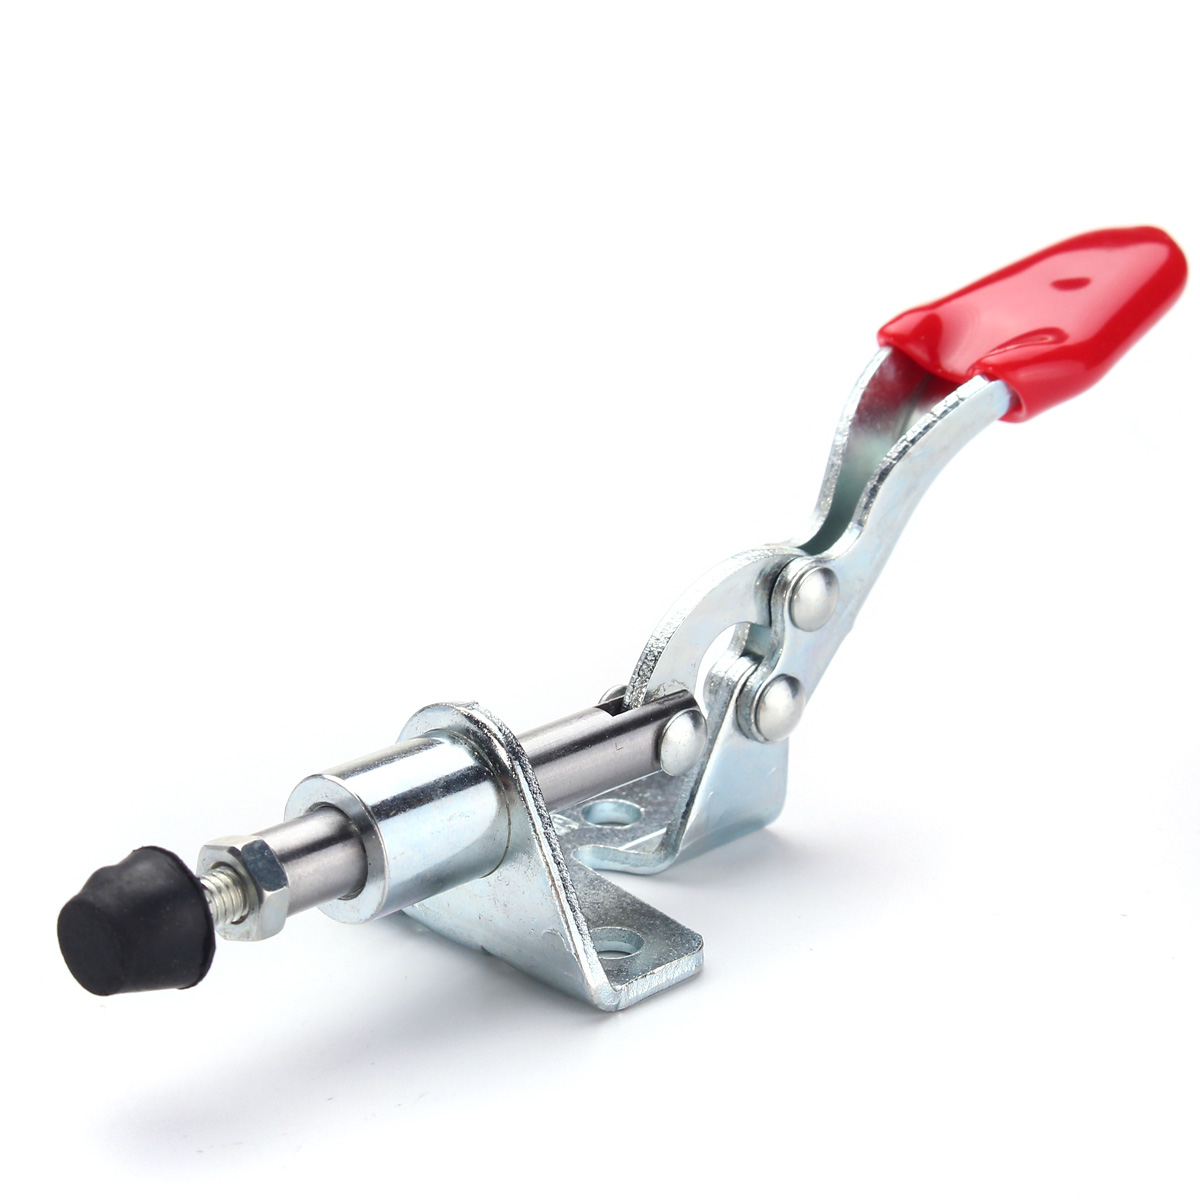 Hand-Tool-Toggle-Clamps-Antislip-Red-Vertical-Clamp-Quick-Releasee-Tool-LD-SD-HS-GH-301-AM-1304292